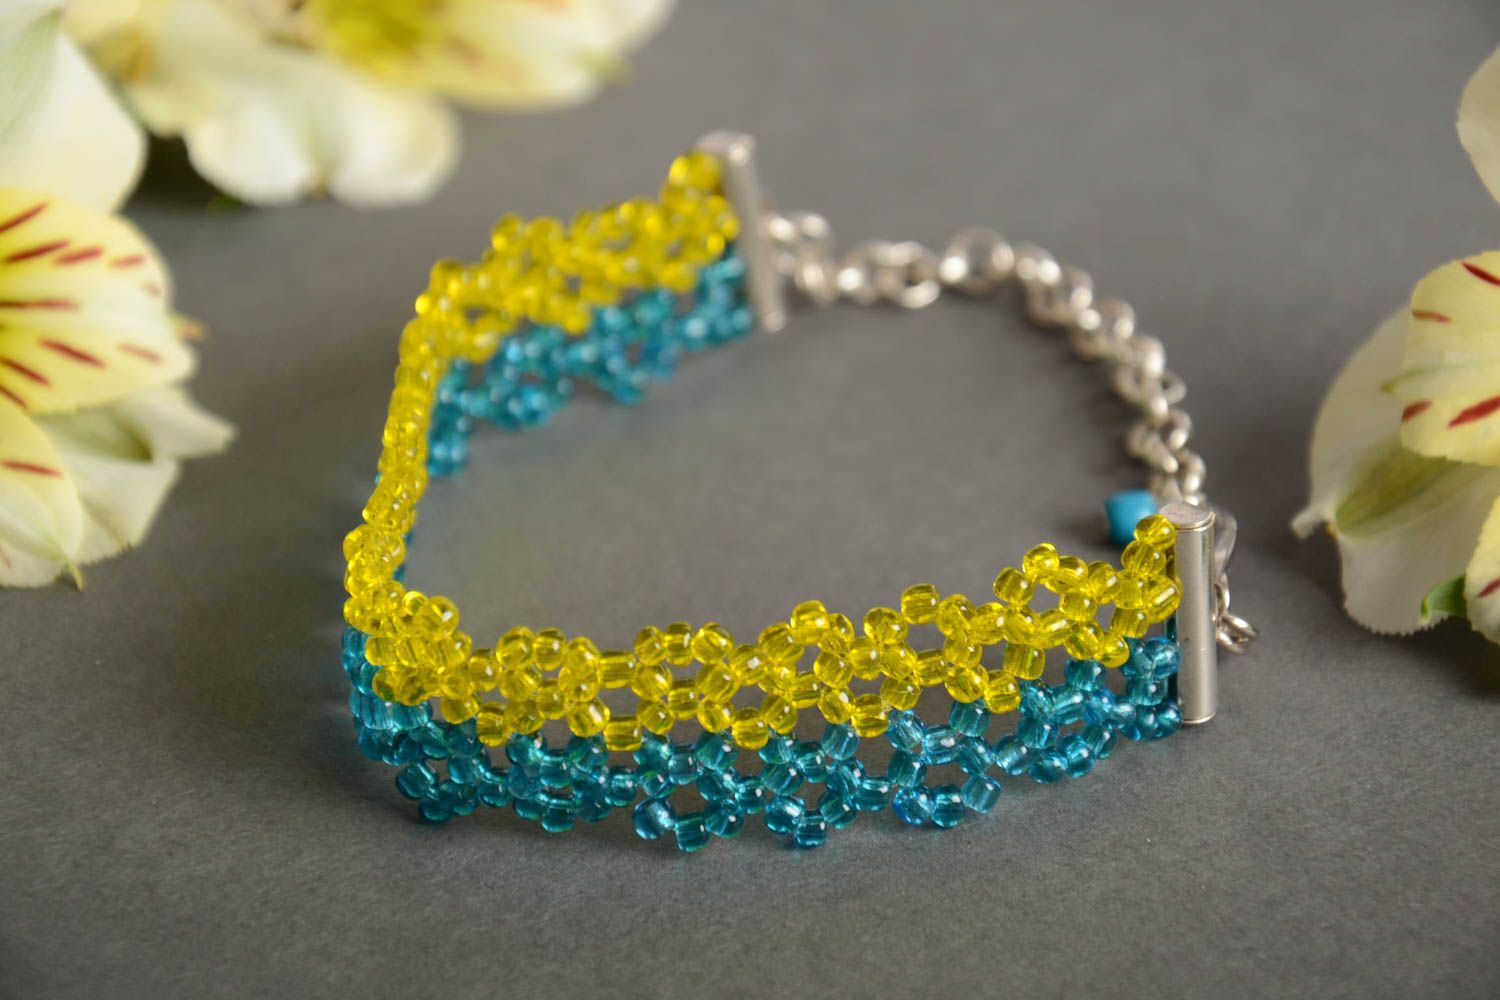 Handmade wrist bracelet crocheted of yellow and blue beads with metal chain photo 1